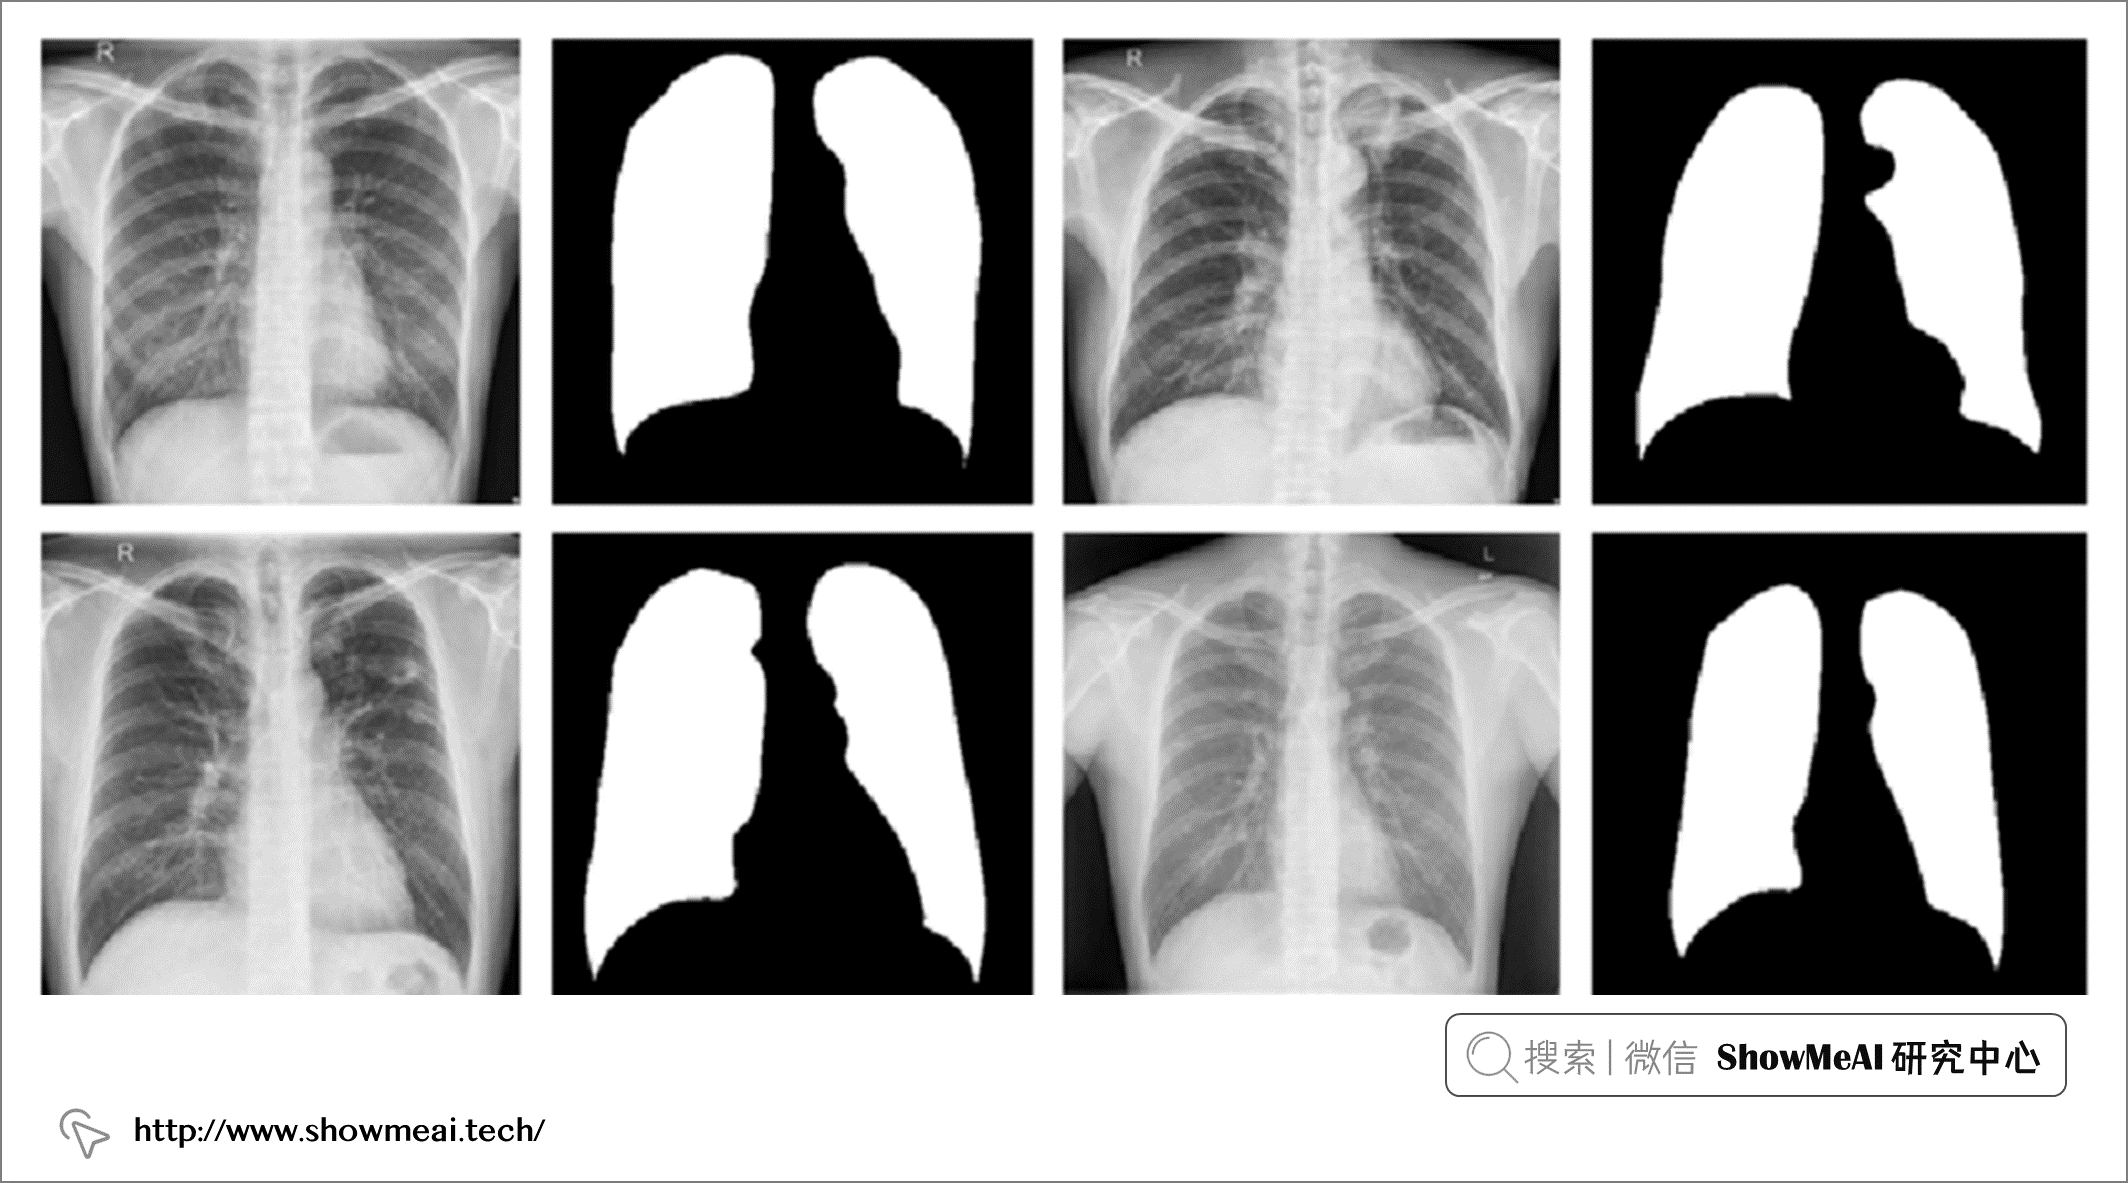 AI+Medical: Using Neural Networks for Medical Image Recognition and Analysis